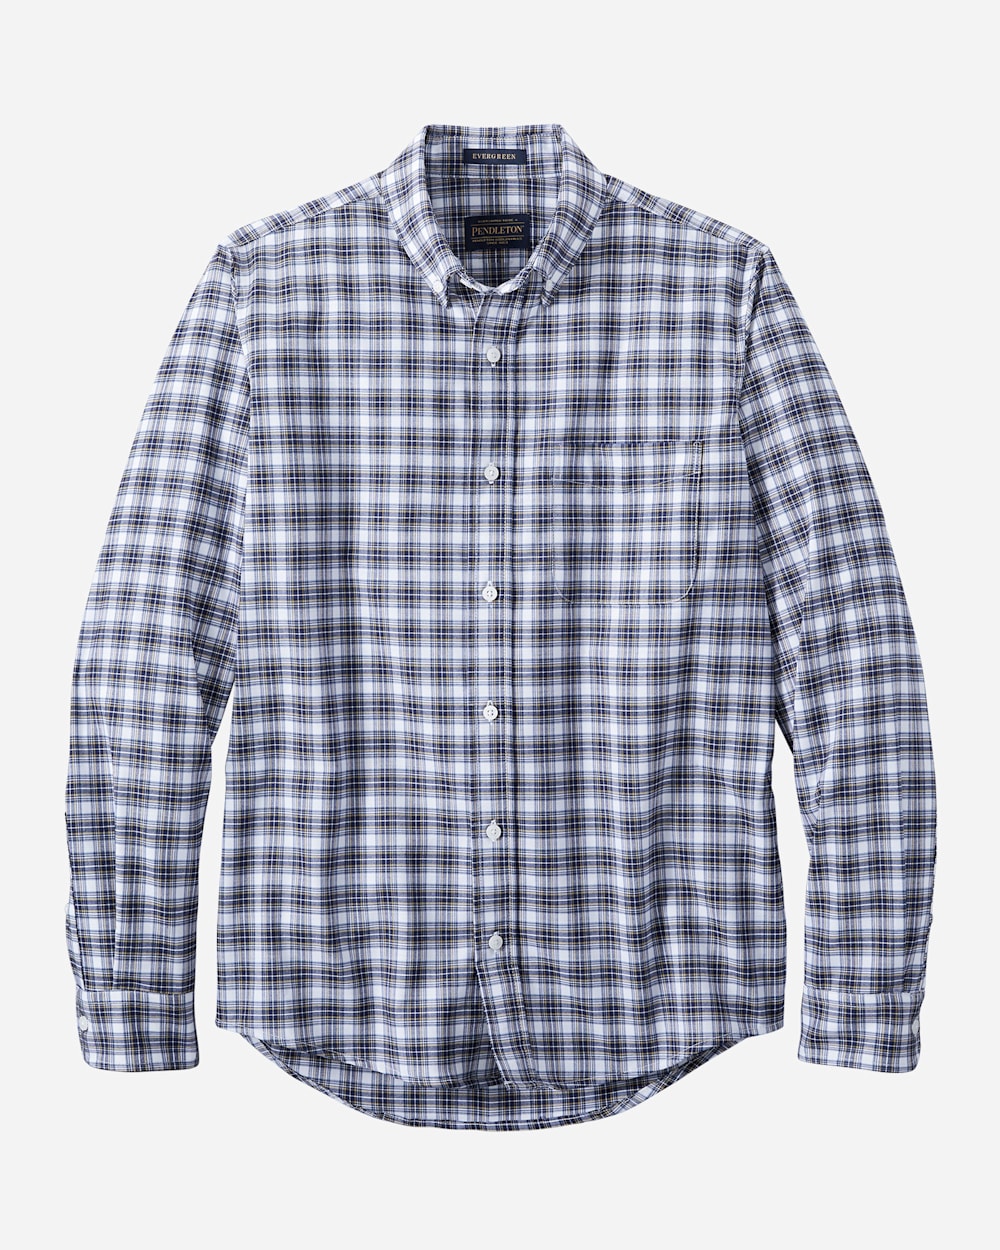 MEN'S EVERGREEN STRETCH MERINO SHIRT IN TEAL/GREY/WHITE CHECK image number 1